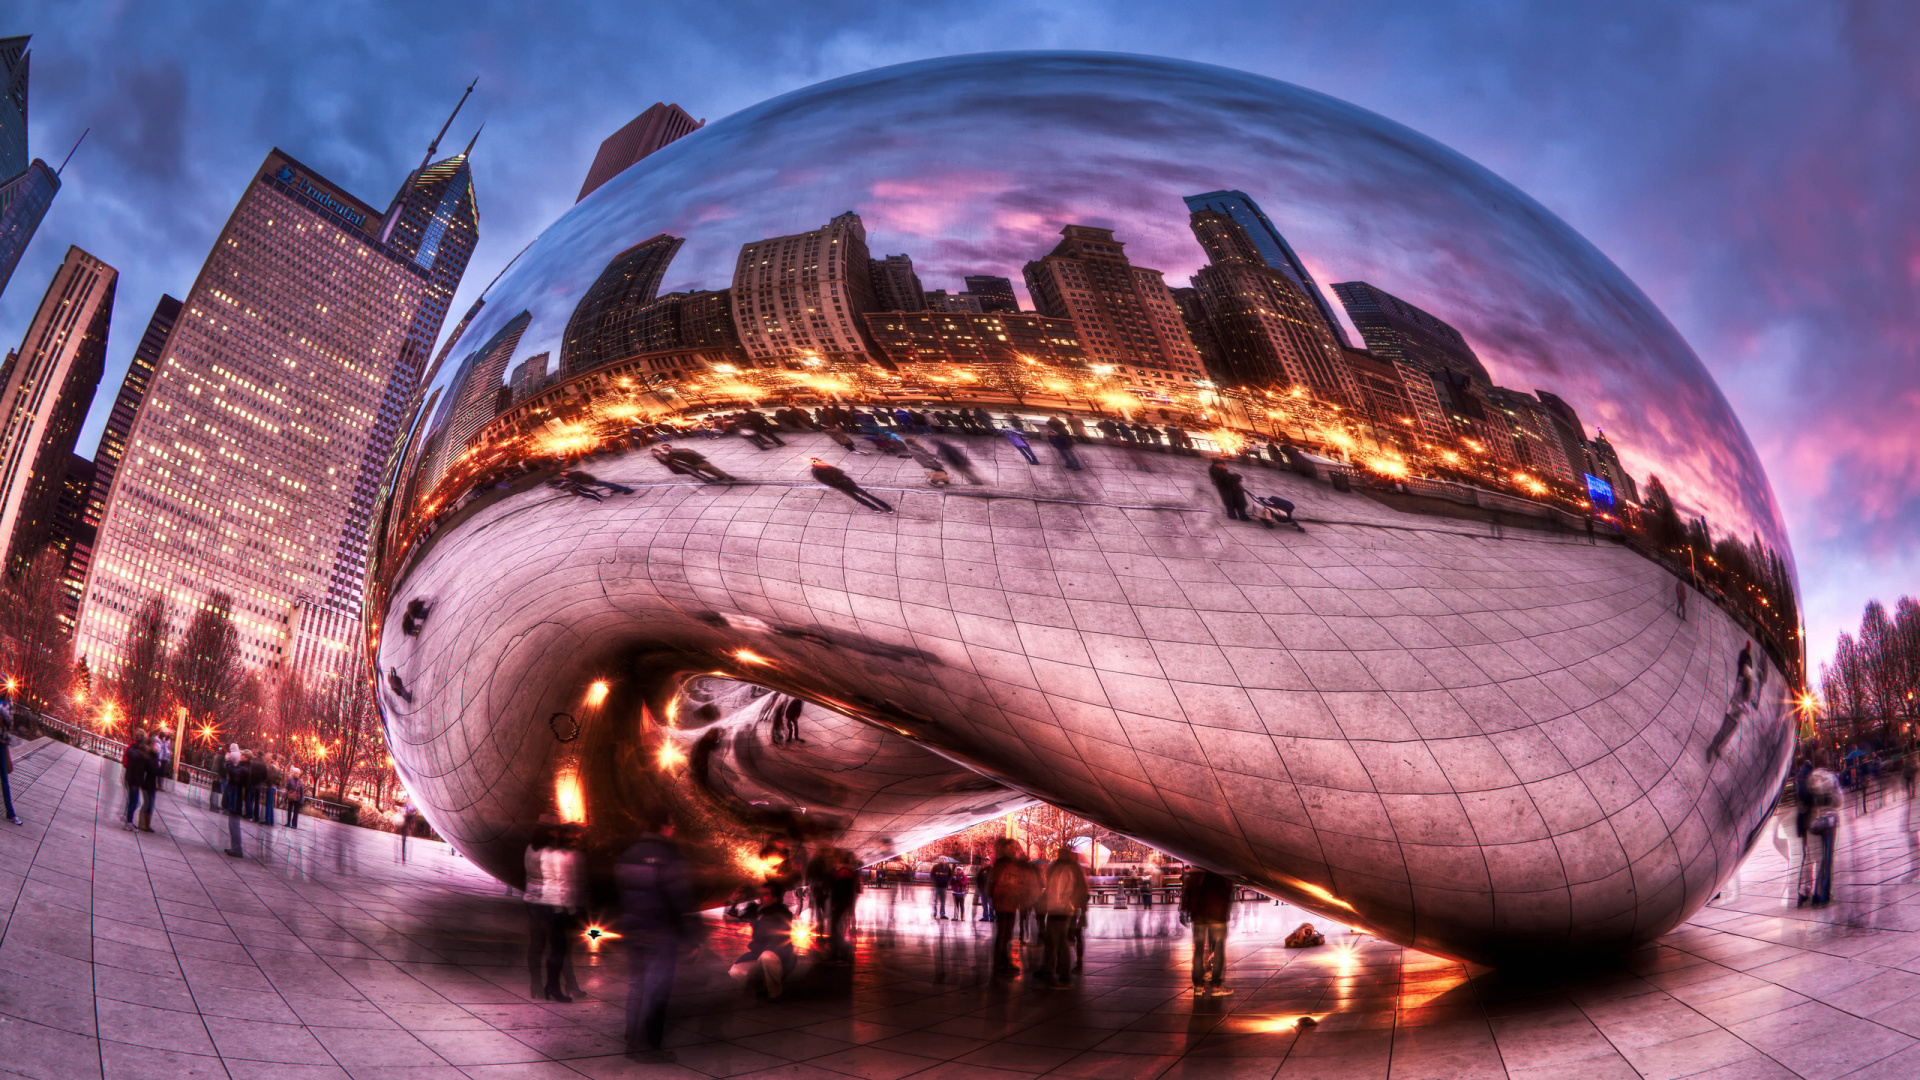 Cloud Gate Chicago During Night Time. Wallpaper in 1920x1080 Resolution